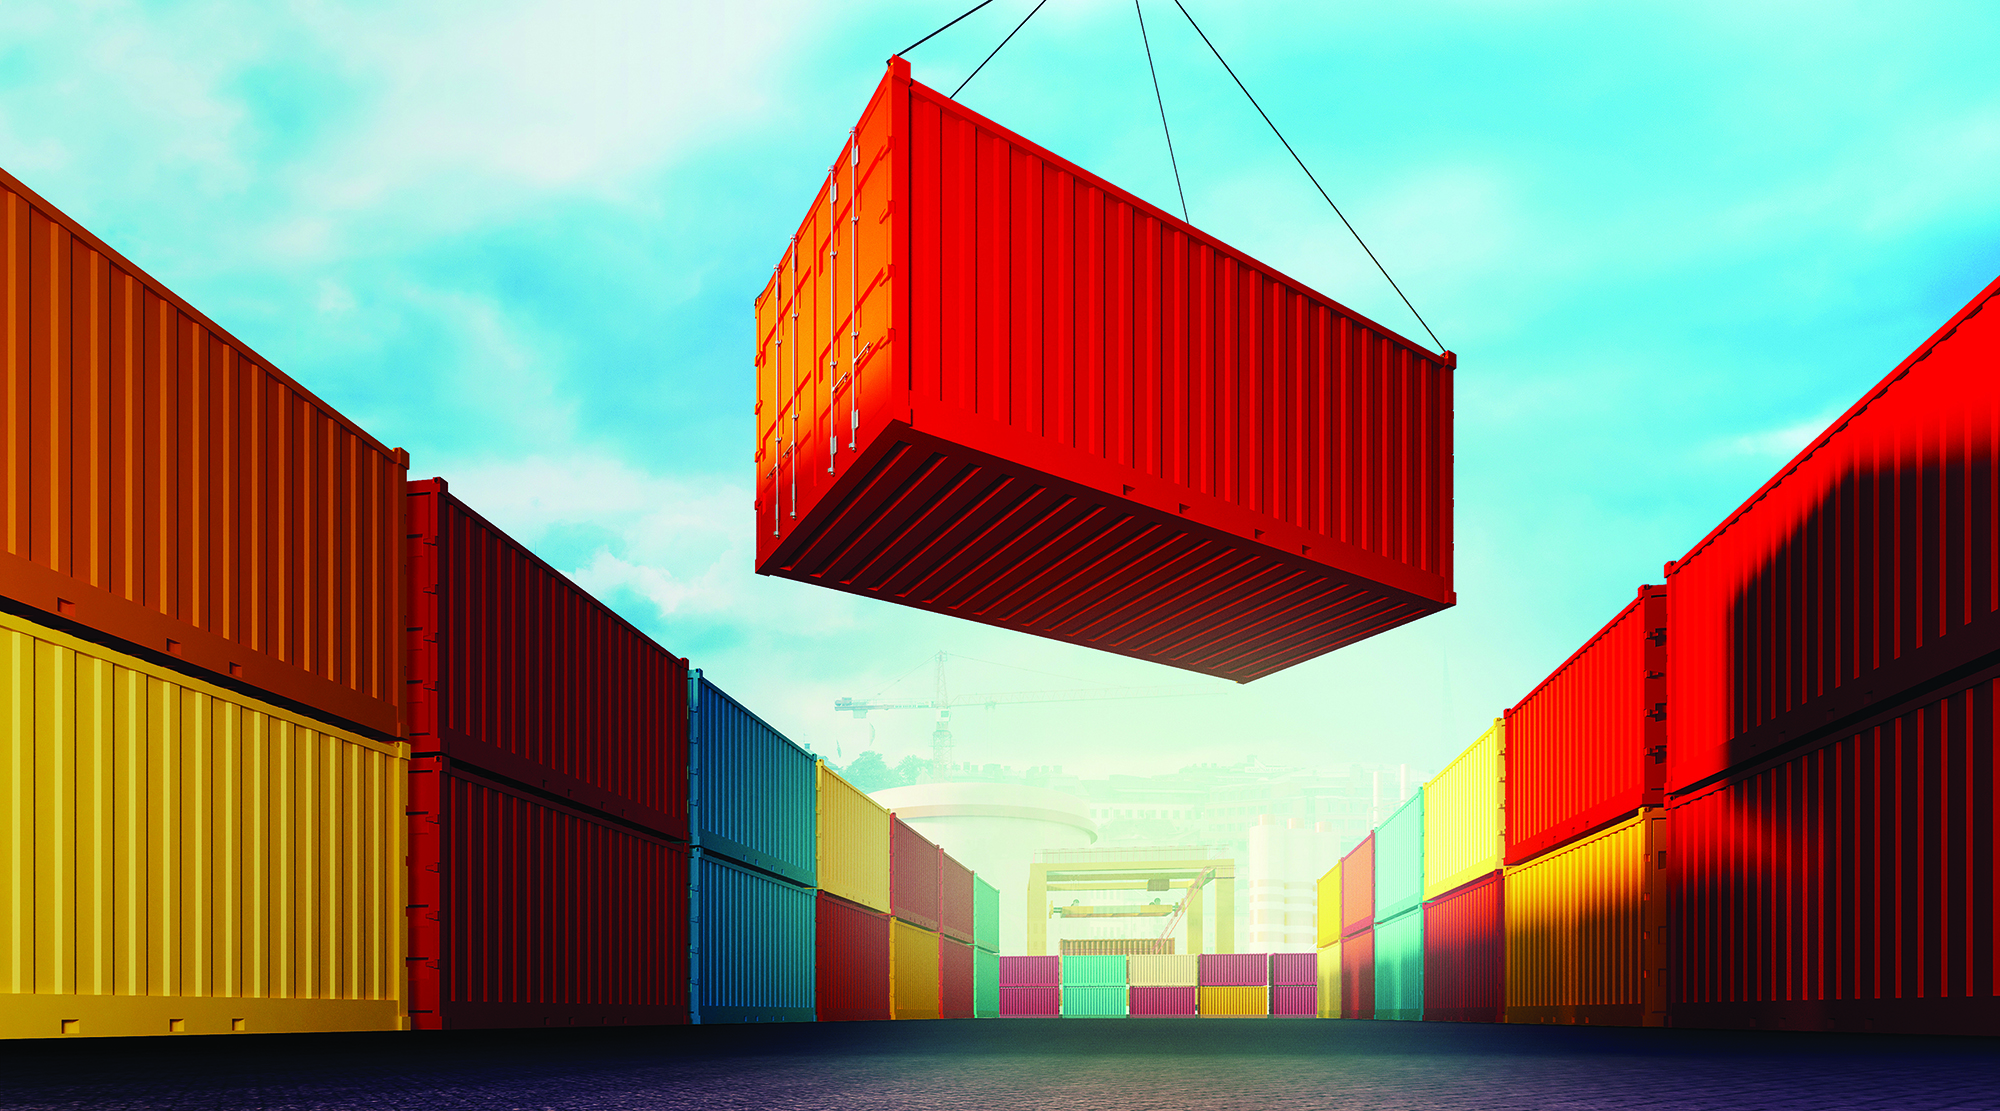 3d rendered illustration of an industrial port with containers. Loading container